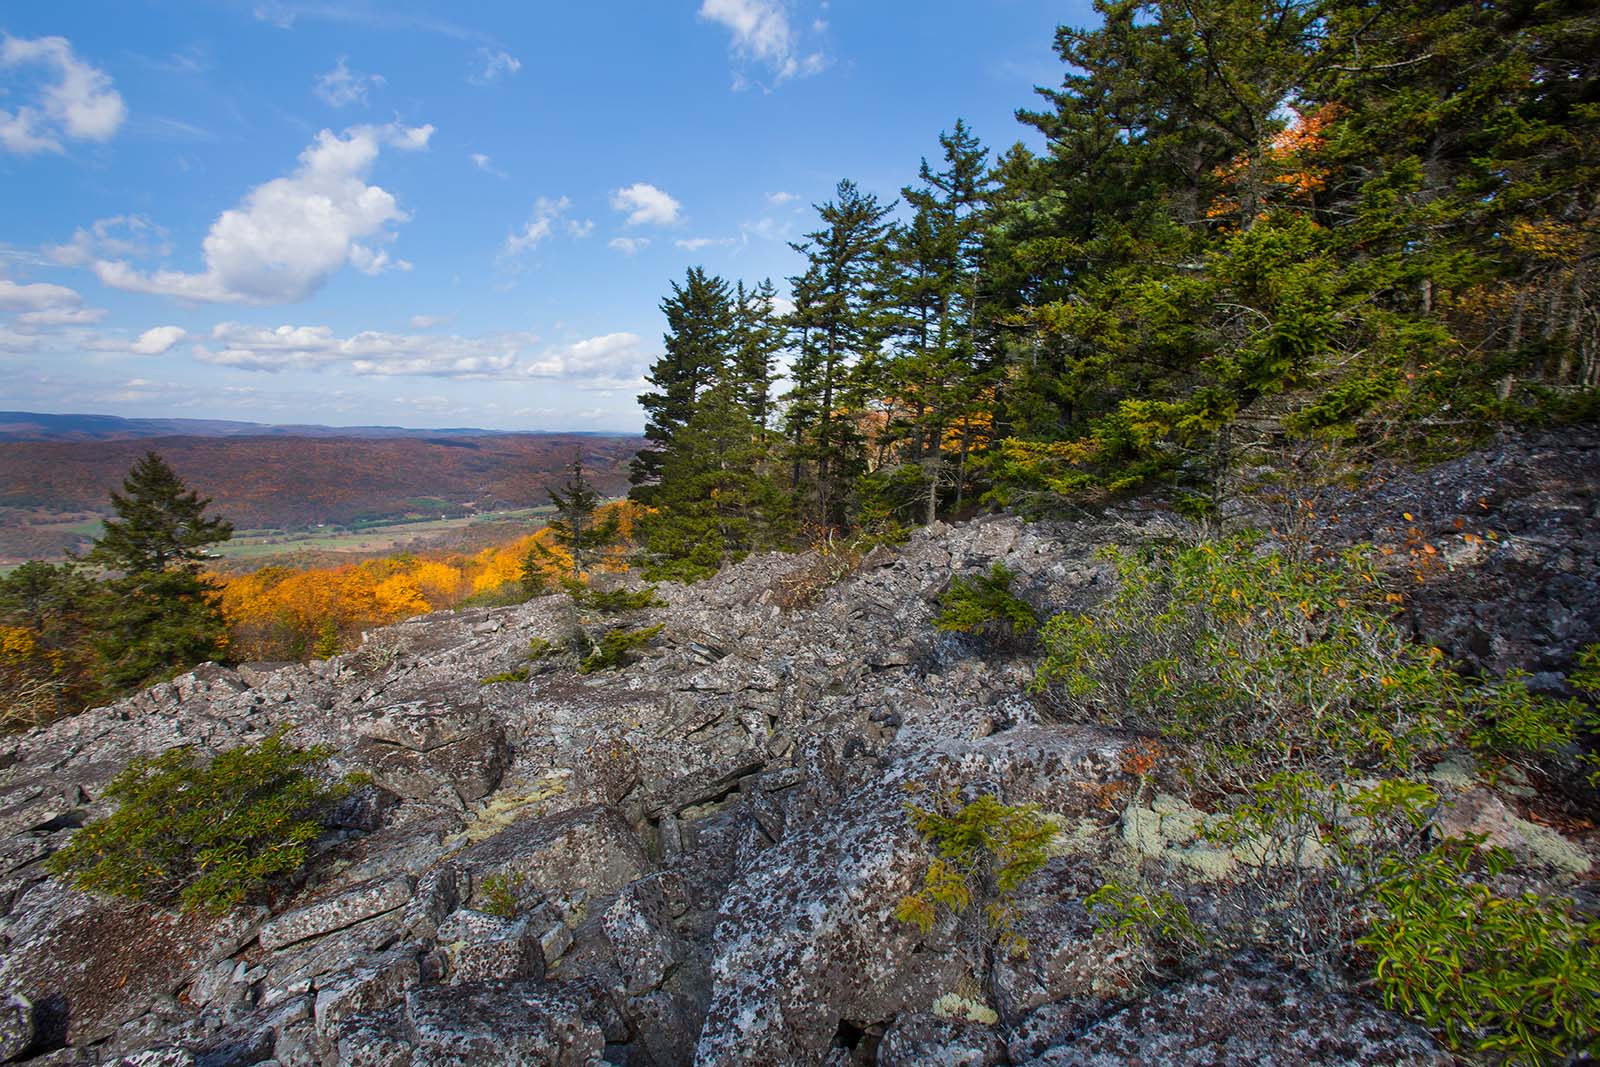 A view from an overlook, showing a valley below and mountains draped in fall foliage in the distance